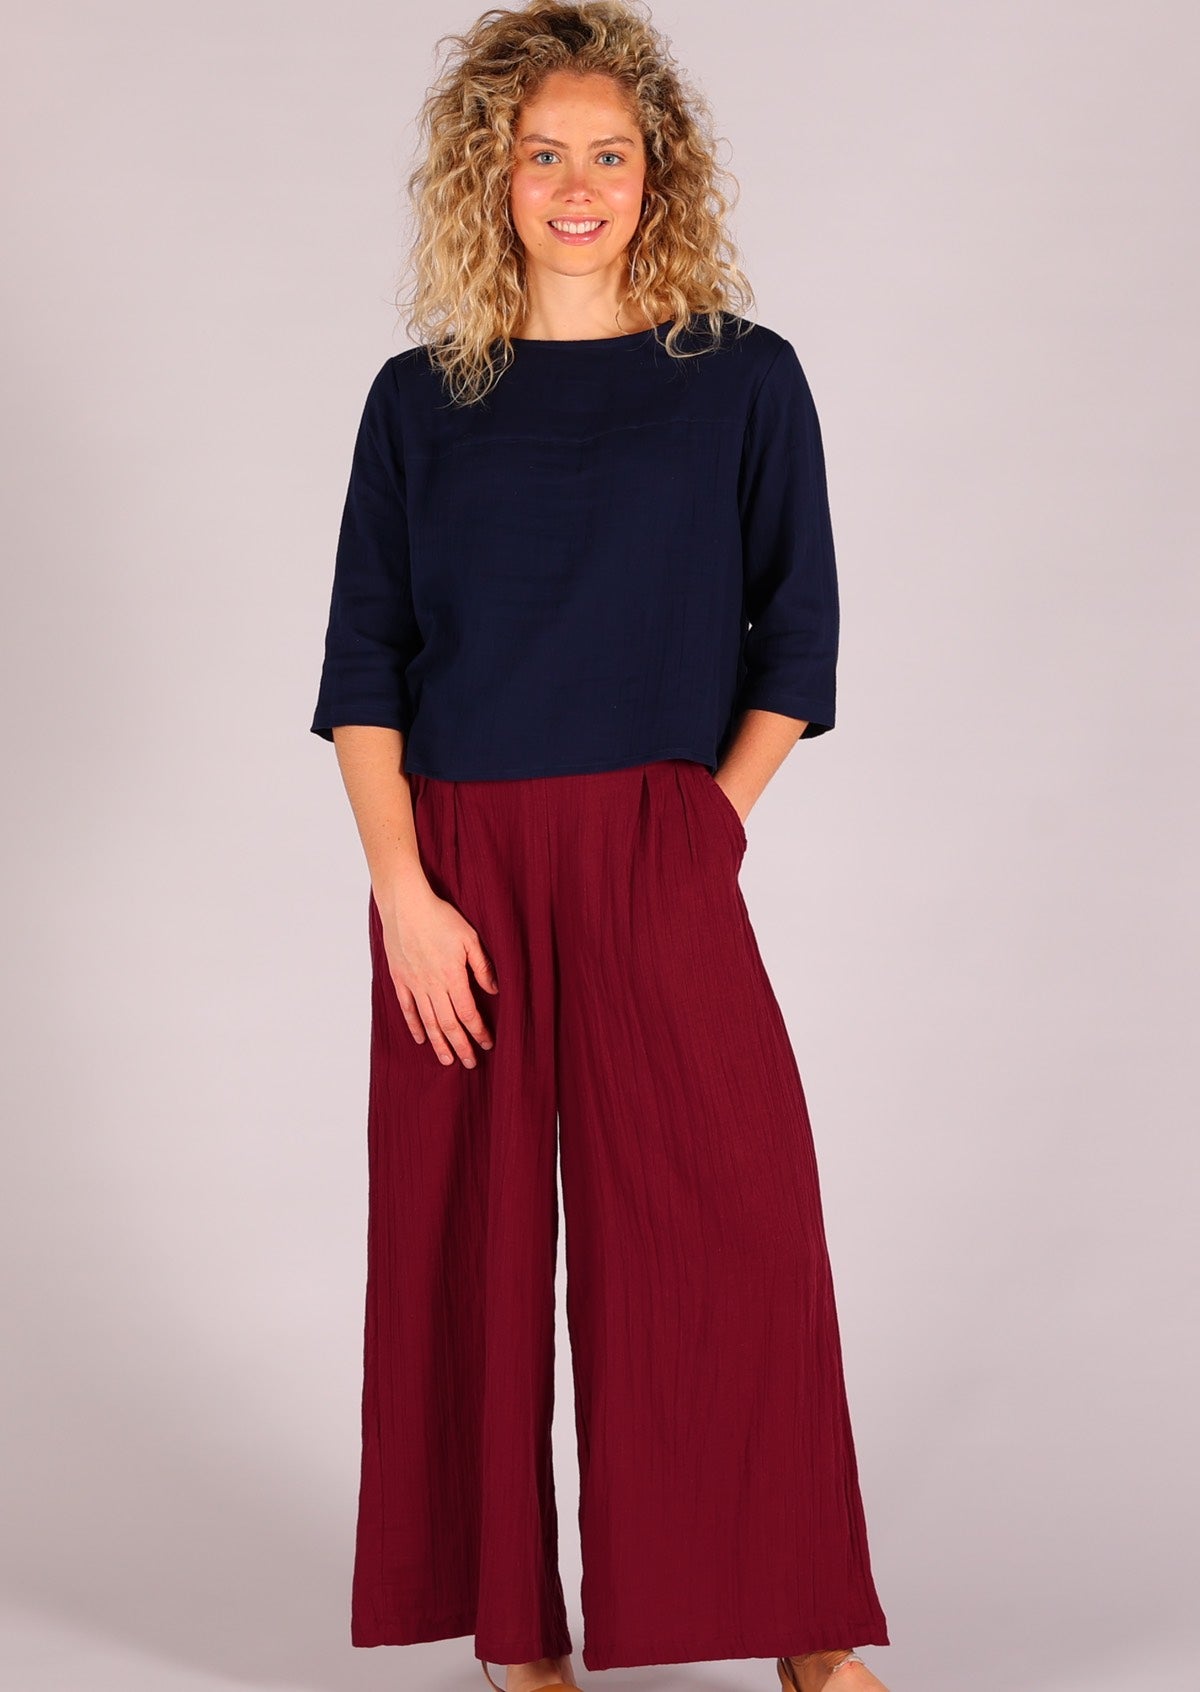 Wide leg double cotton pants with pockets in deep red